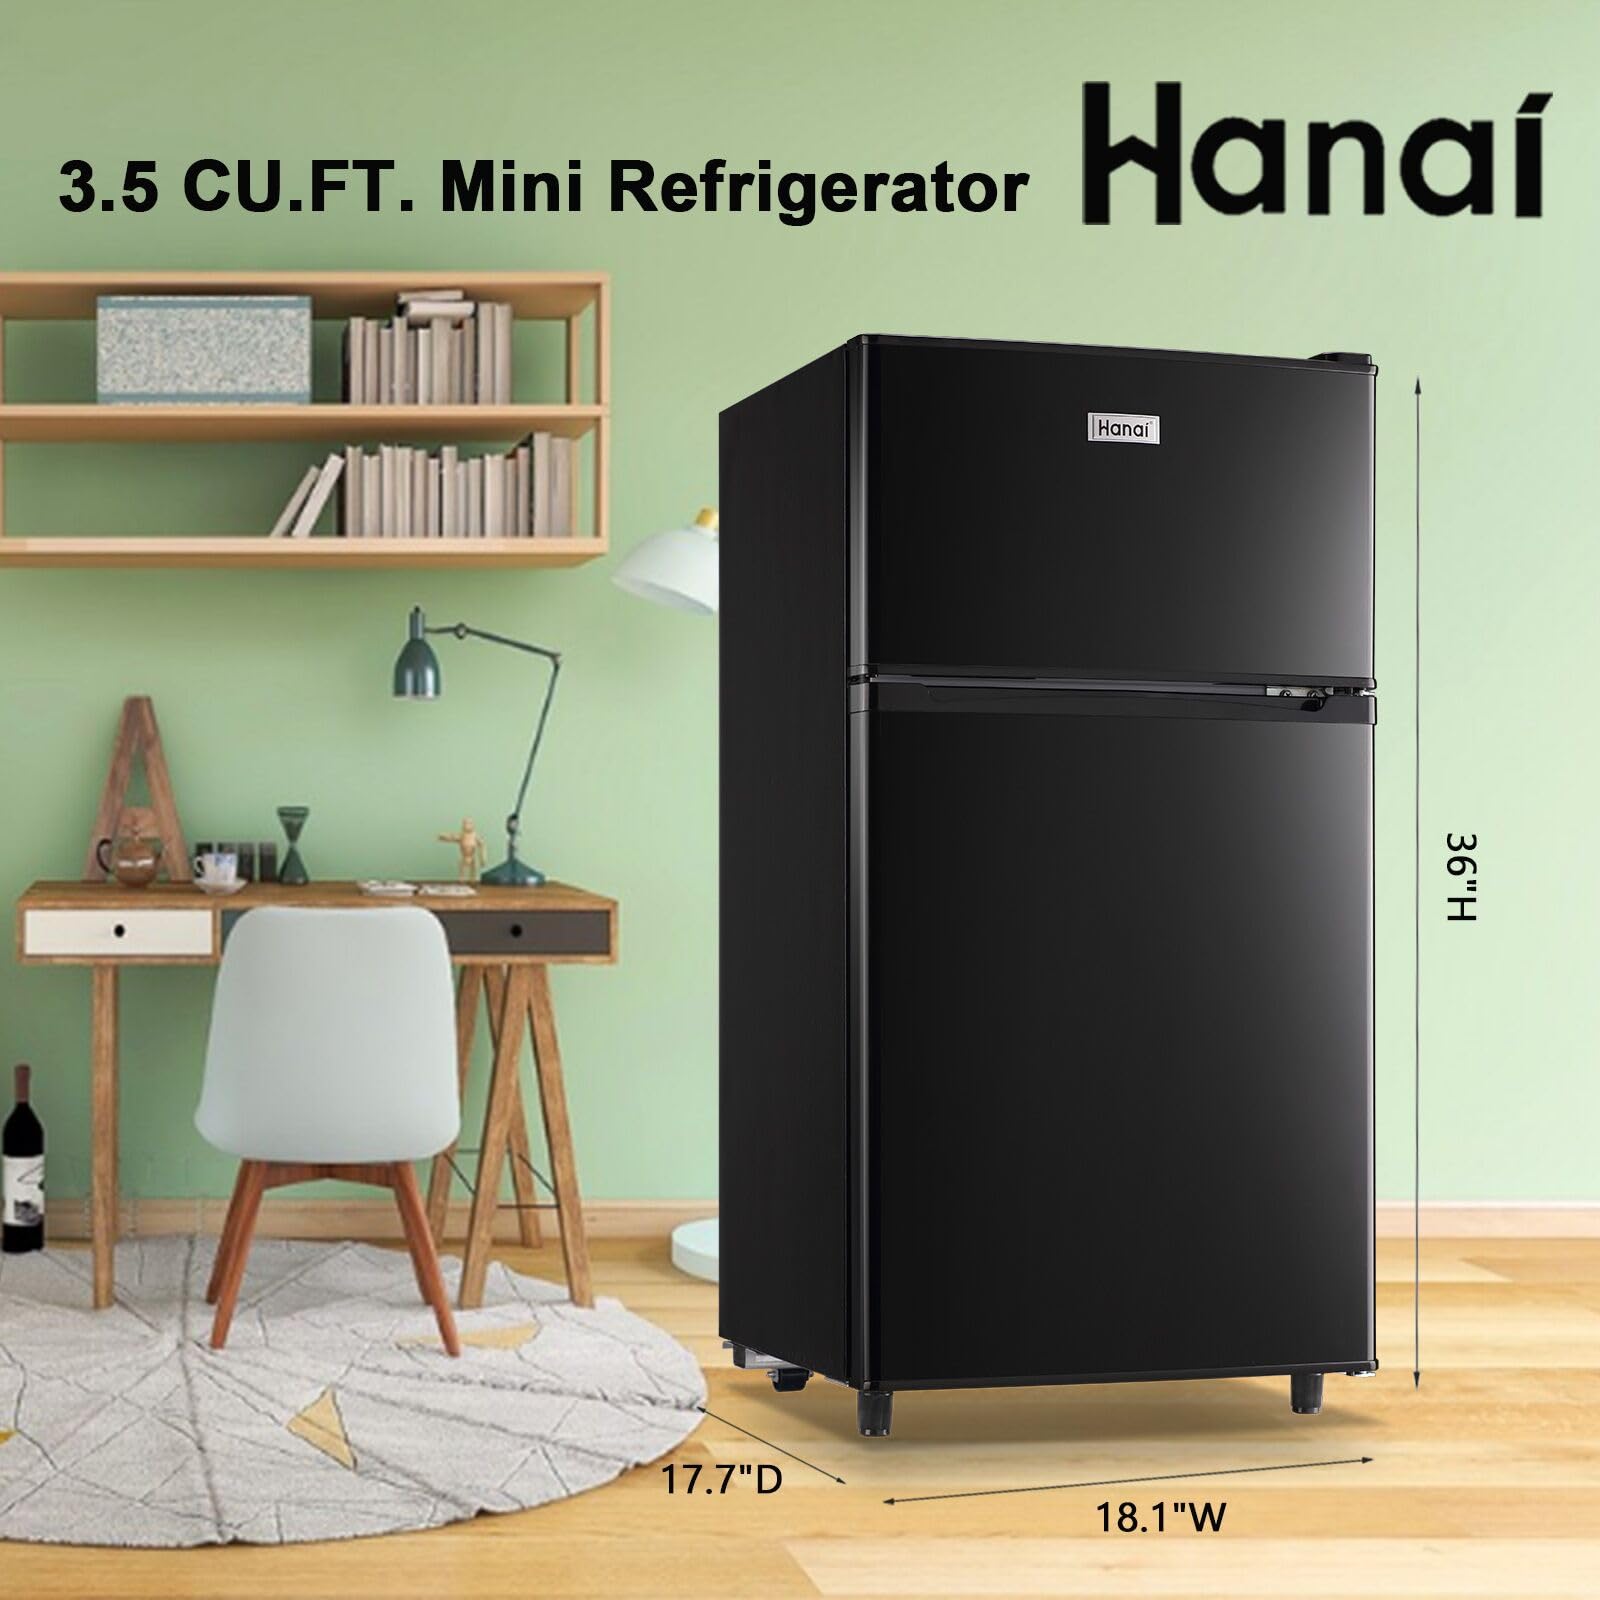 WANAI Compact Refrigerator 3.5 Cu.ft Dual Door Mini Fridge with Freezer, Small Refrigerator with 7 TEMP Modes, Energy Saving, Low Noise for Bedroom, Dorm, Office, Apartment, Black